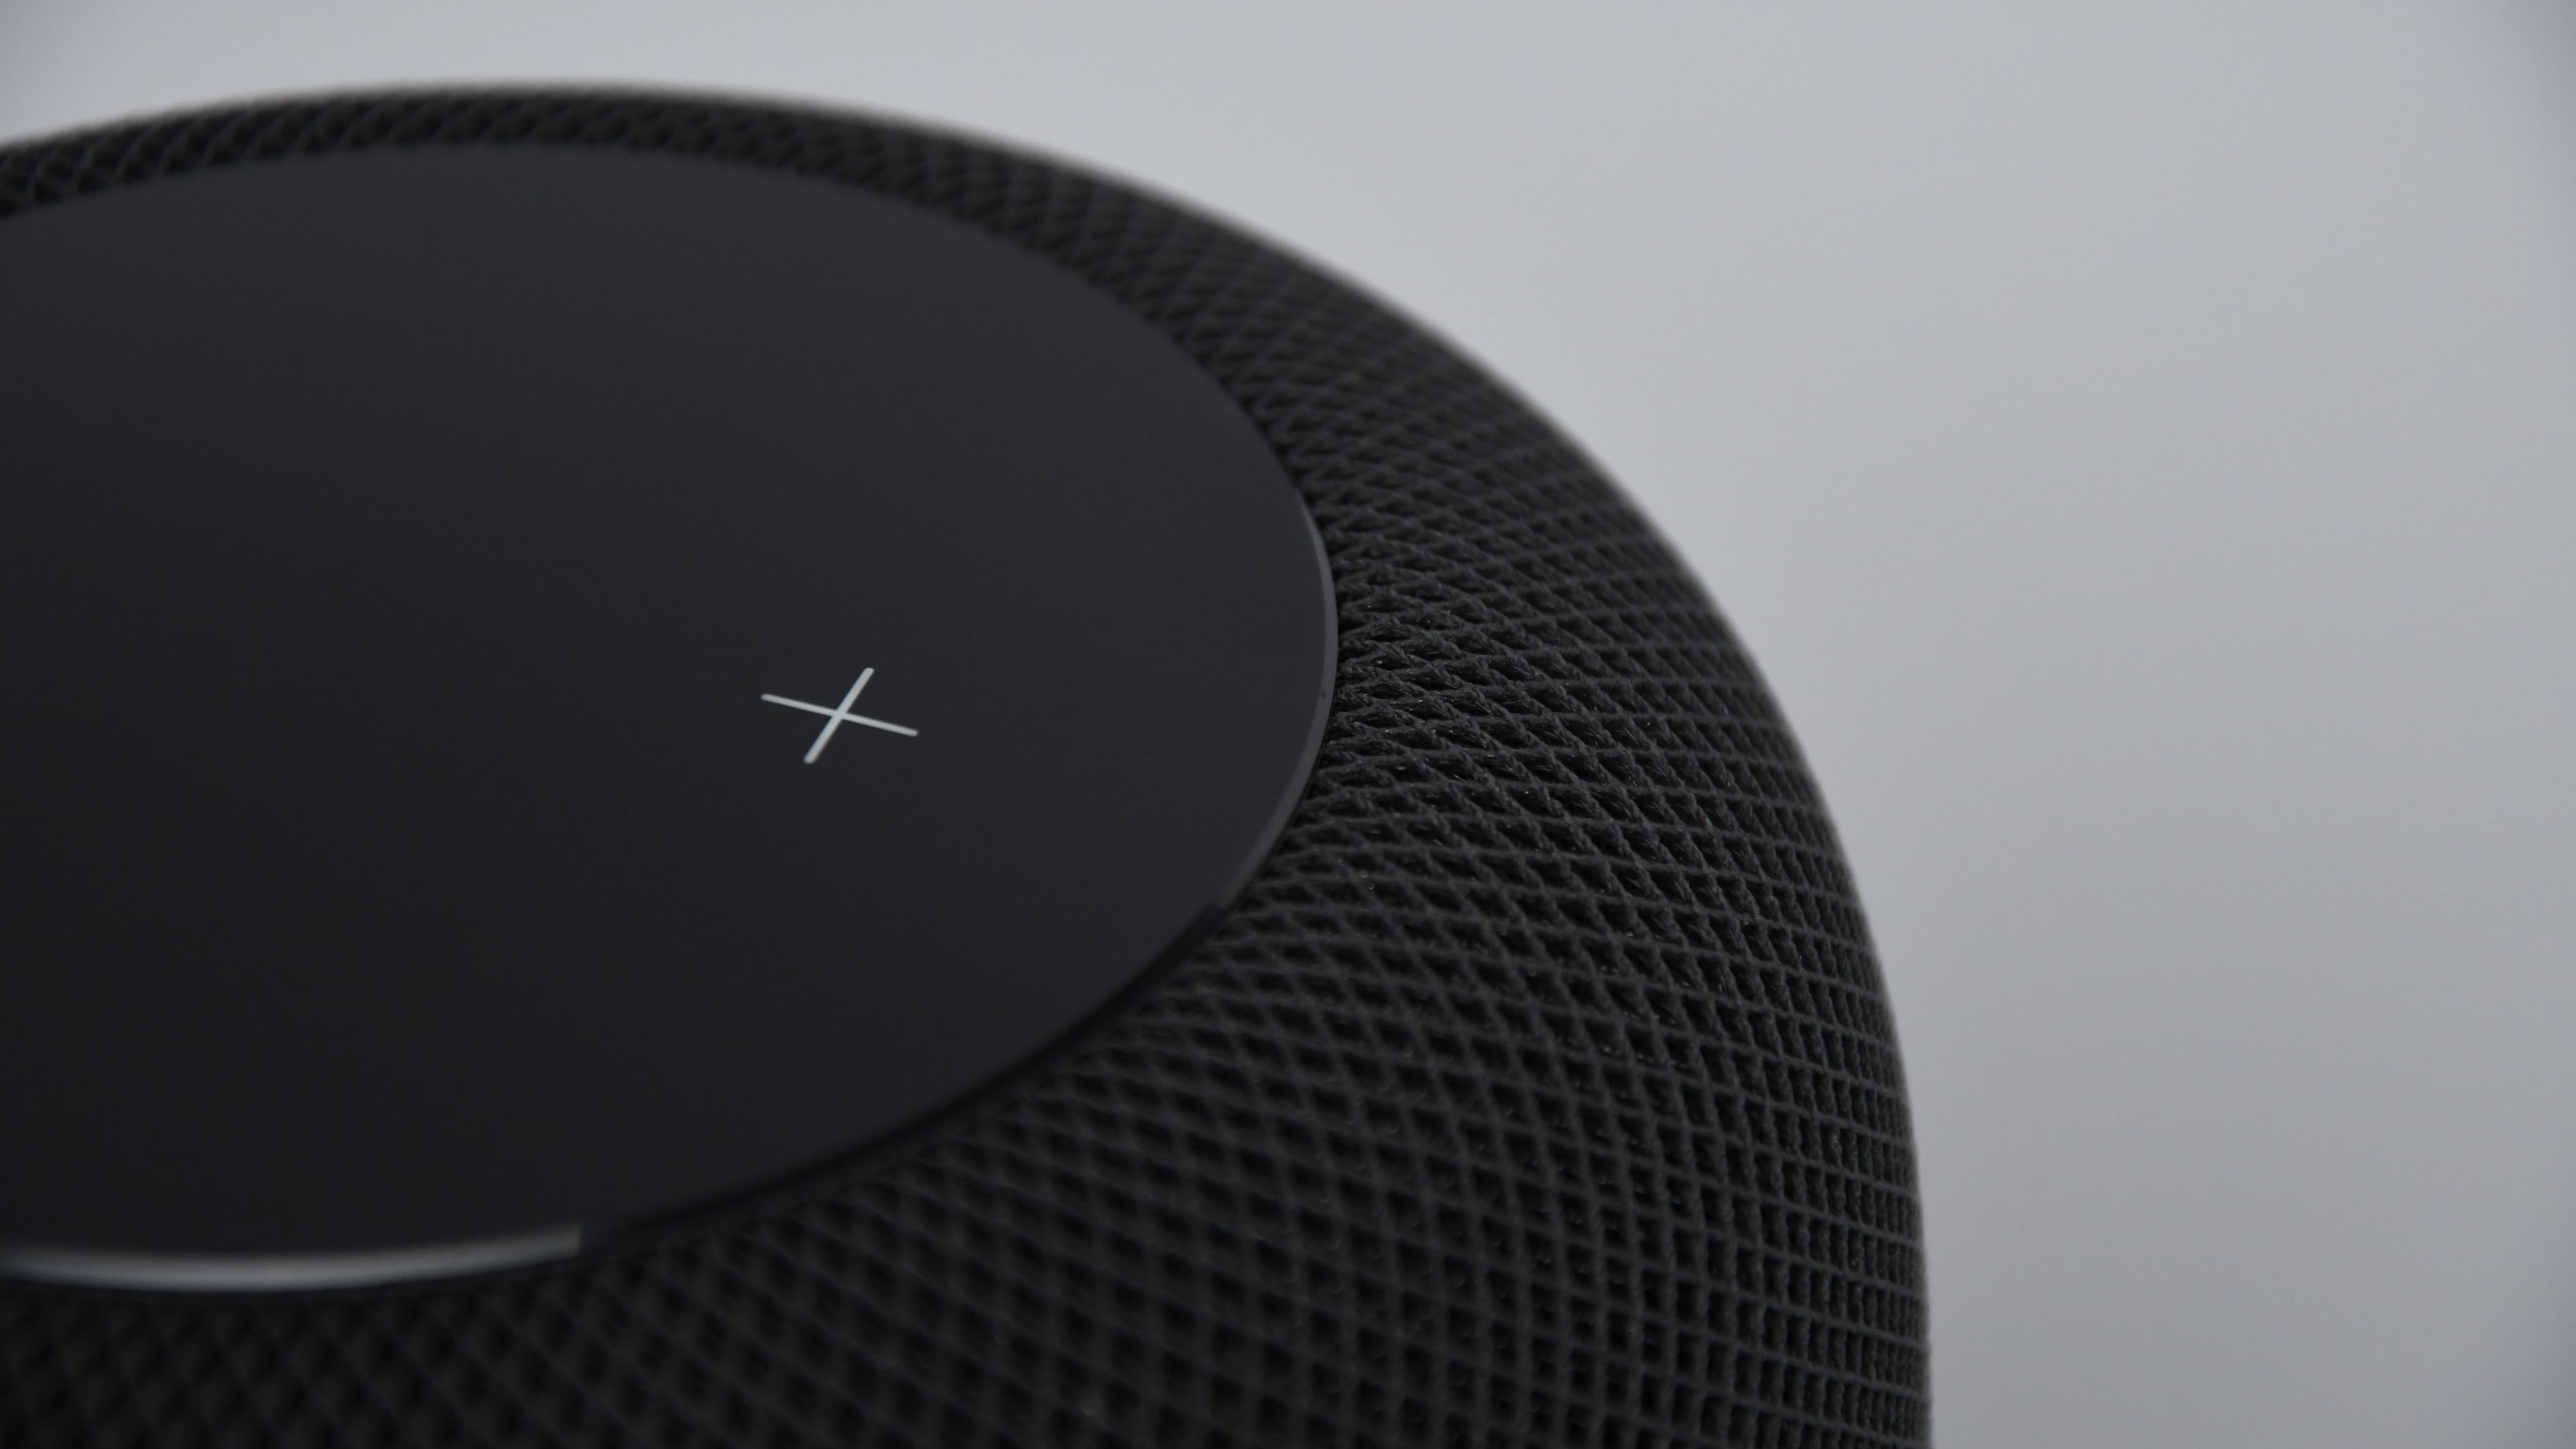 Closeup showing the volume up button on the touch surface of a black HomePod smart speaker 